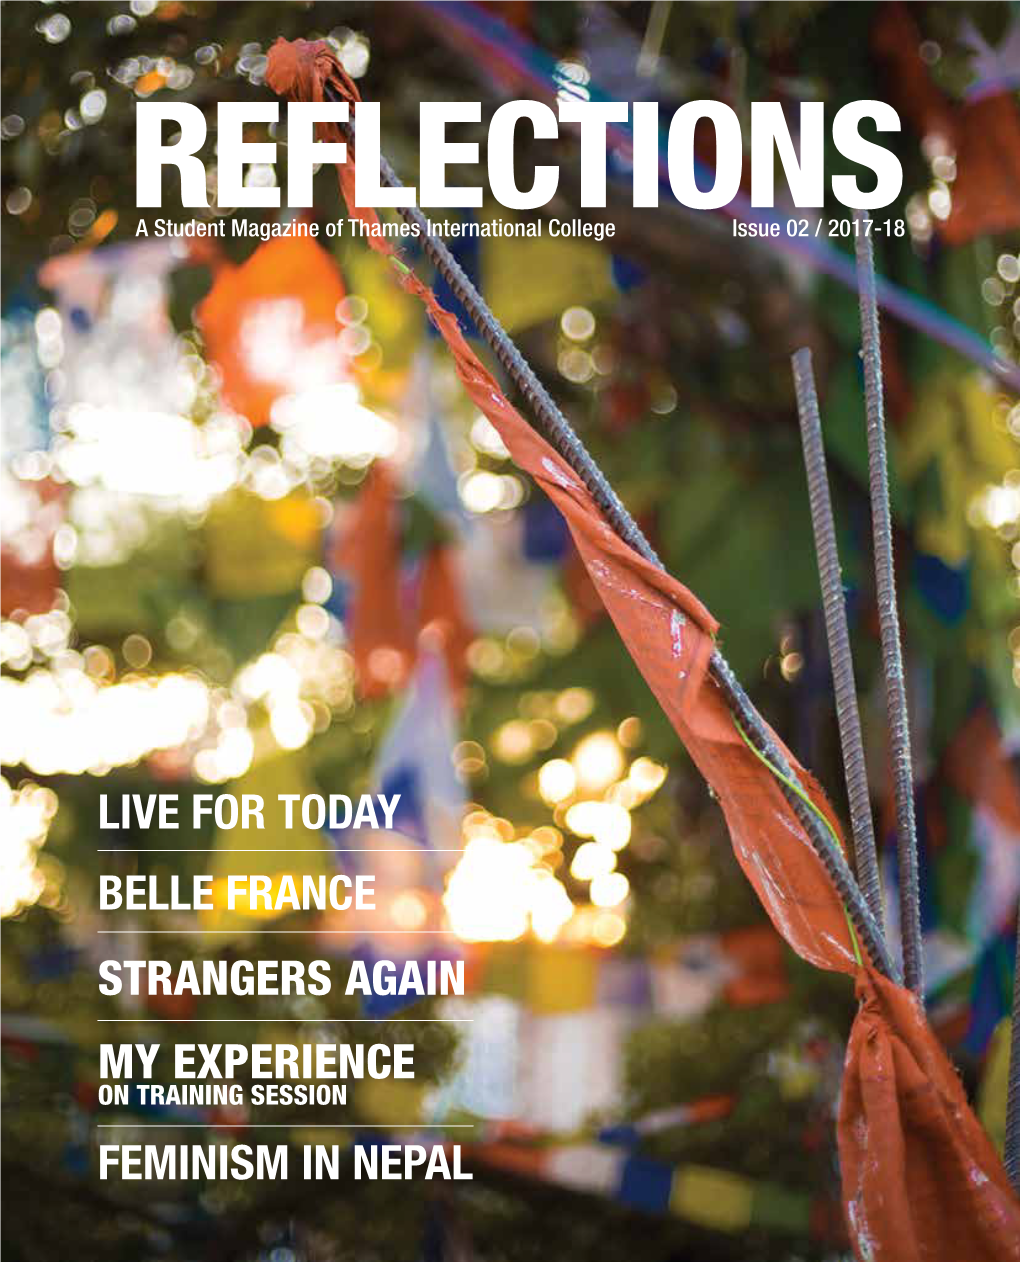 REFLECTIONS a Student Magazine of Thames International College Issue 02 / 2017-18